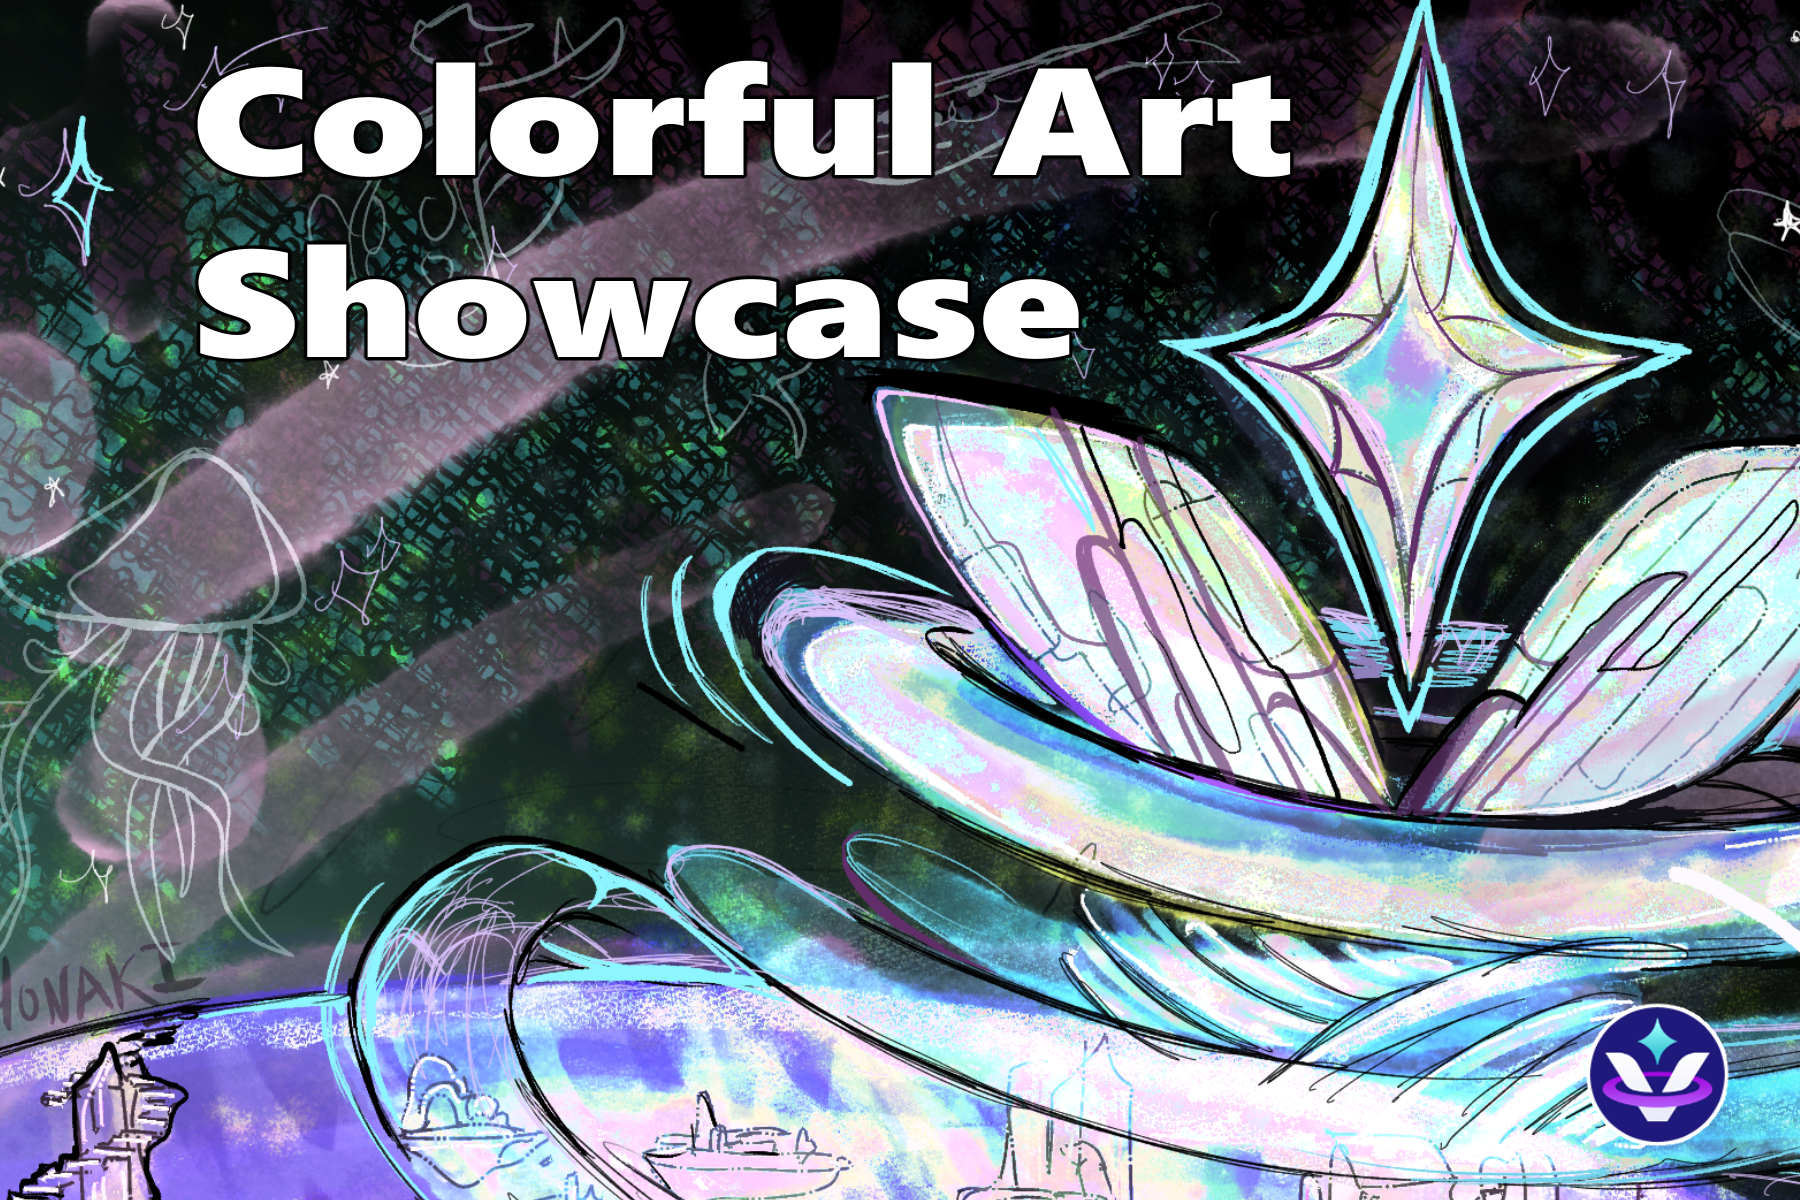 colorful space city featuring blue, purple, white hues and the text "colorful art showcase"